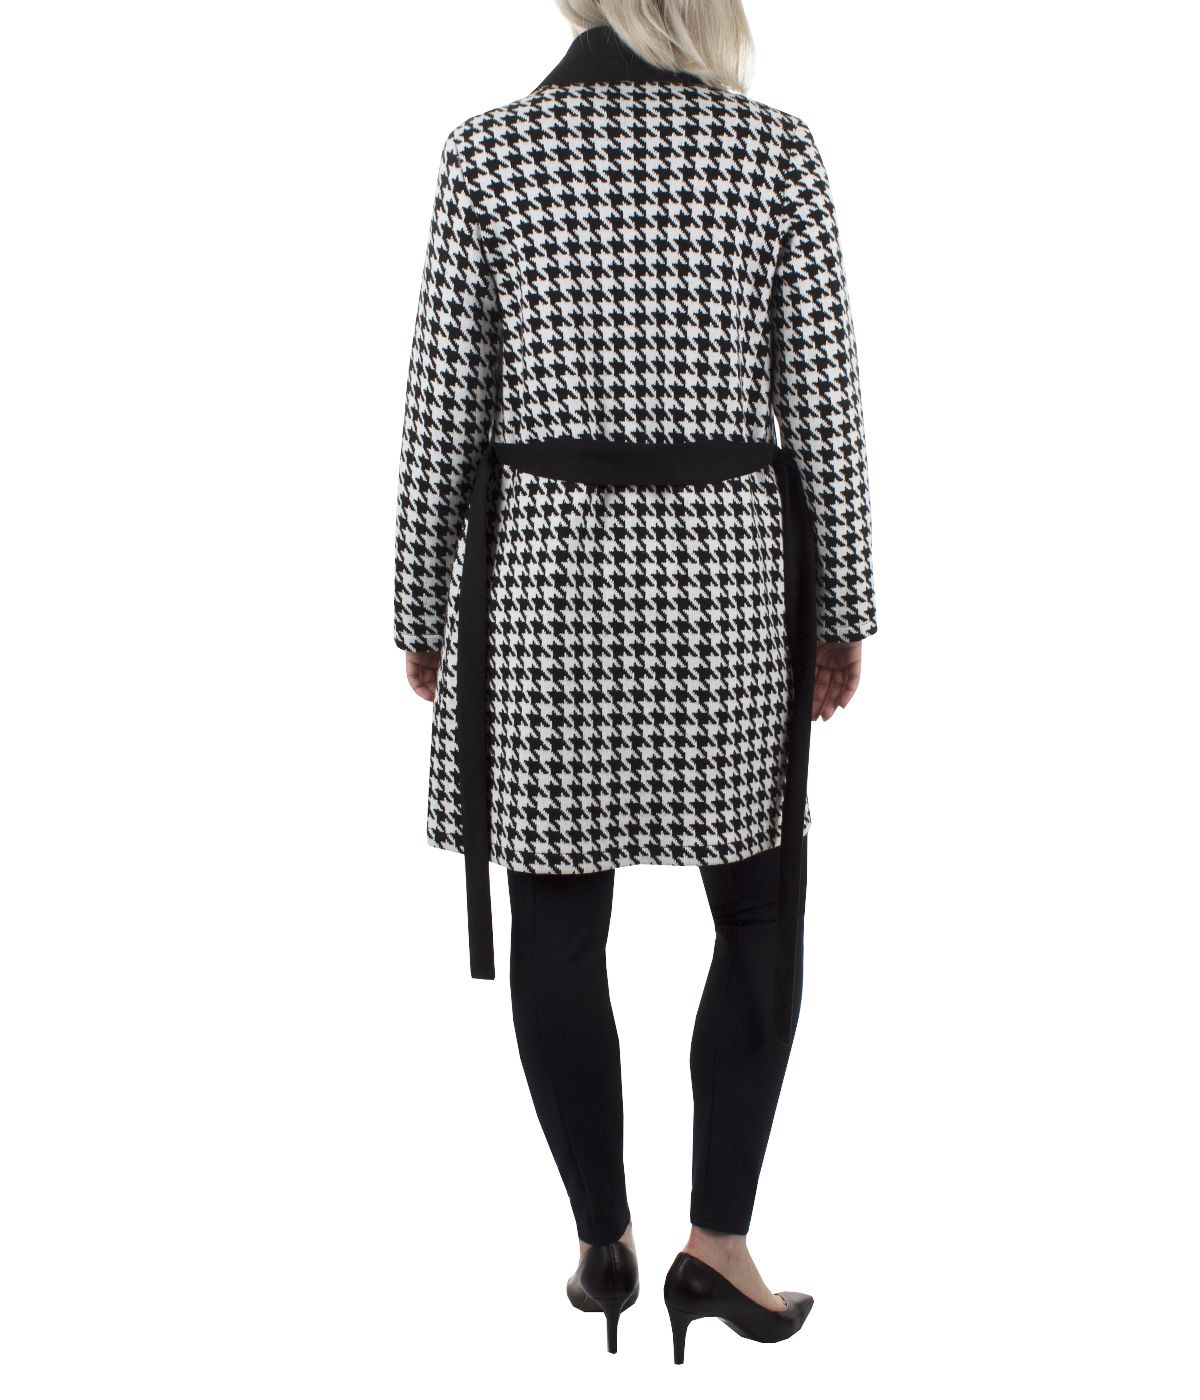 Acrylic wrap-around jacket with contrasting belt and lapel and houndstooth print 4